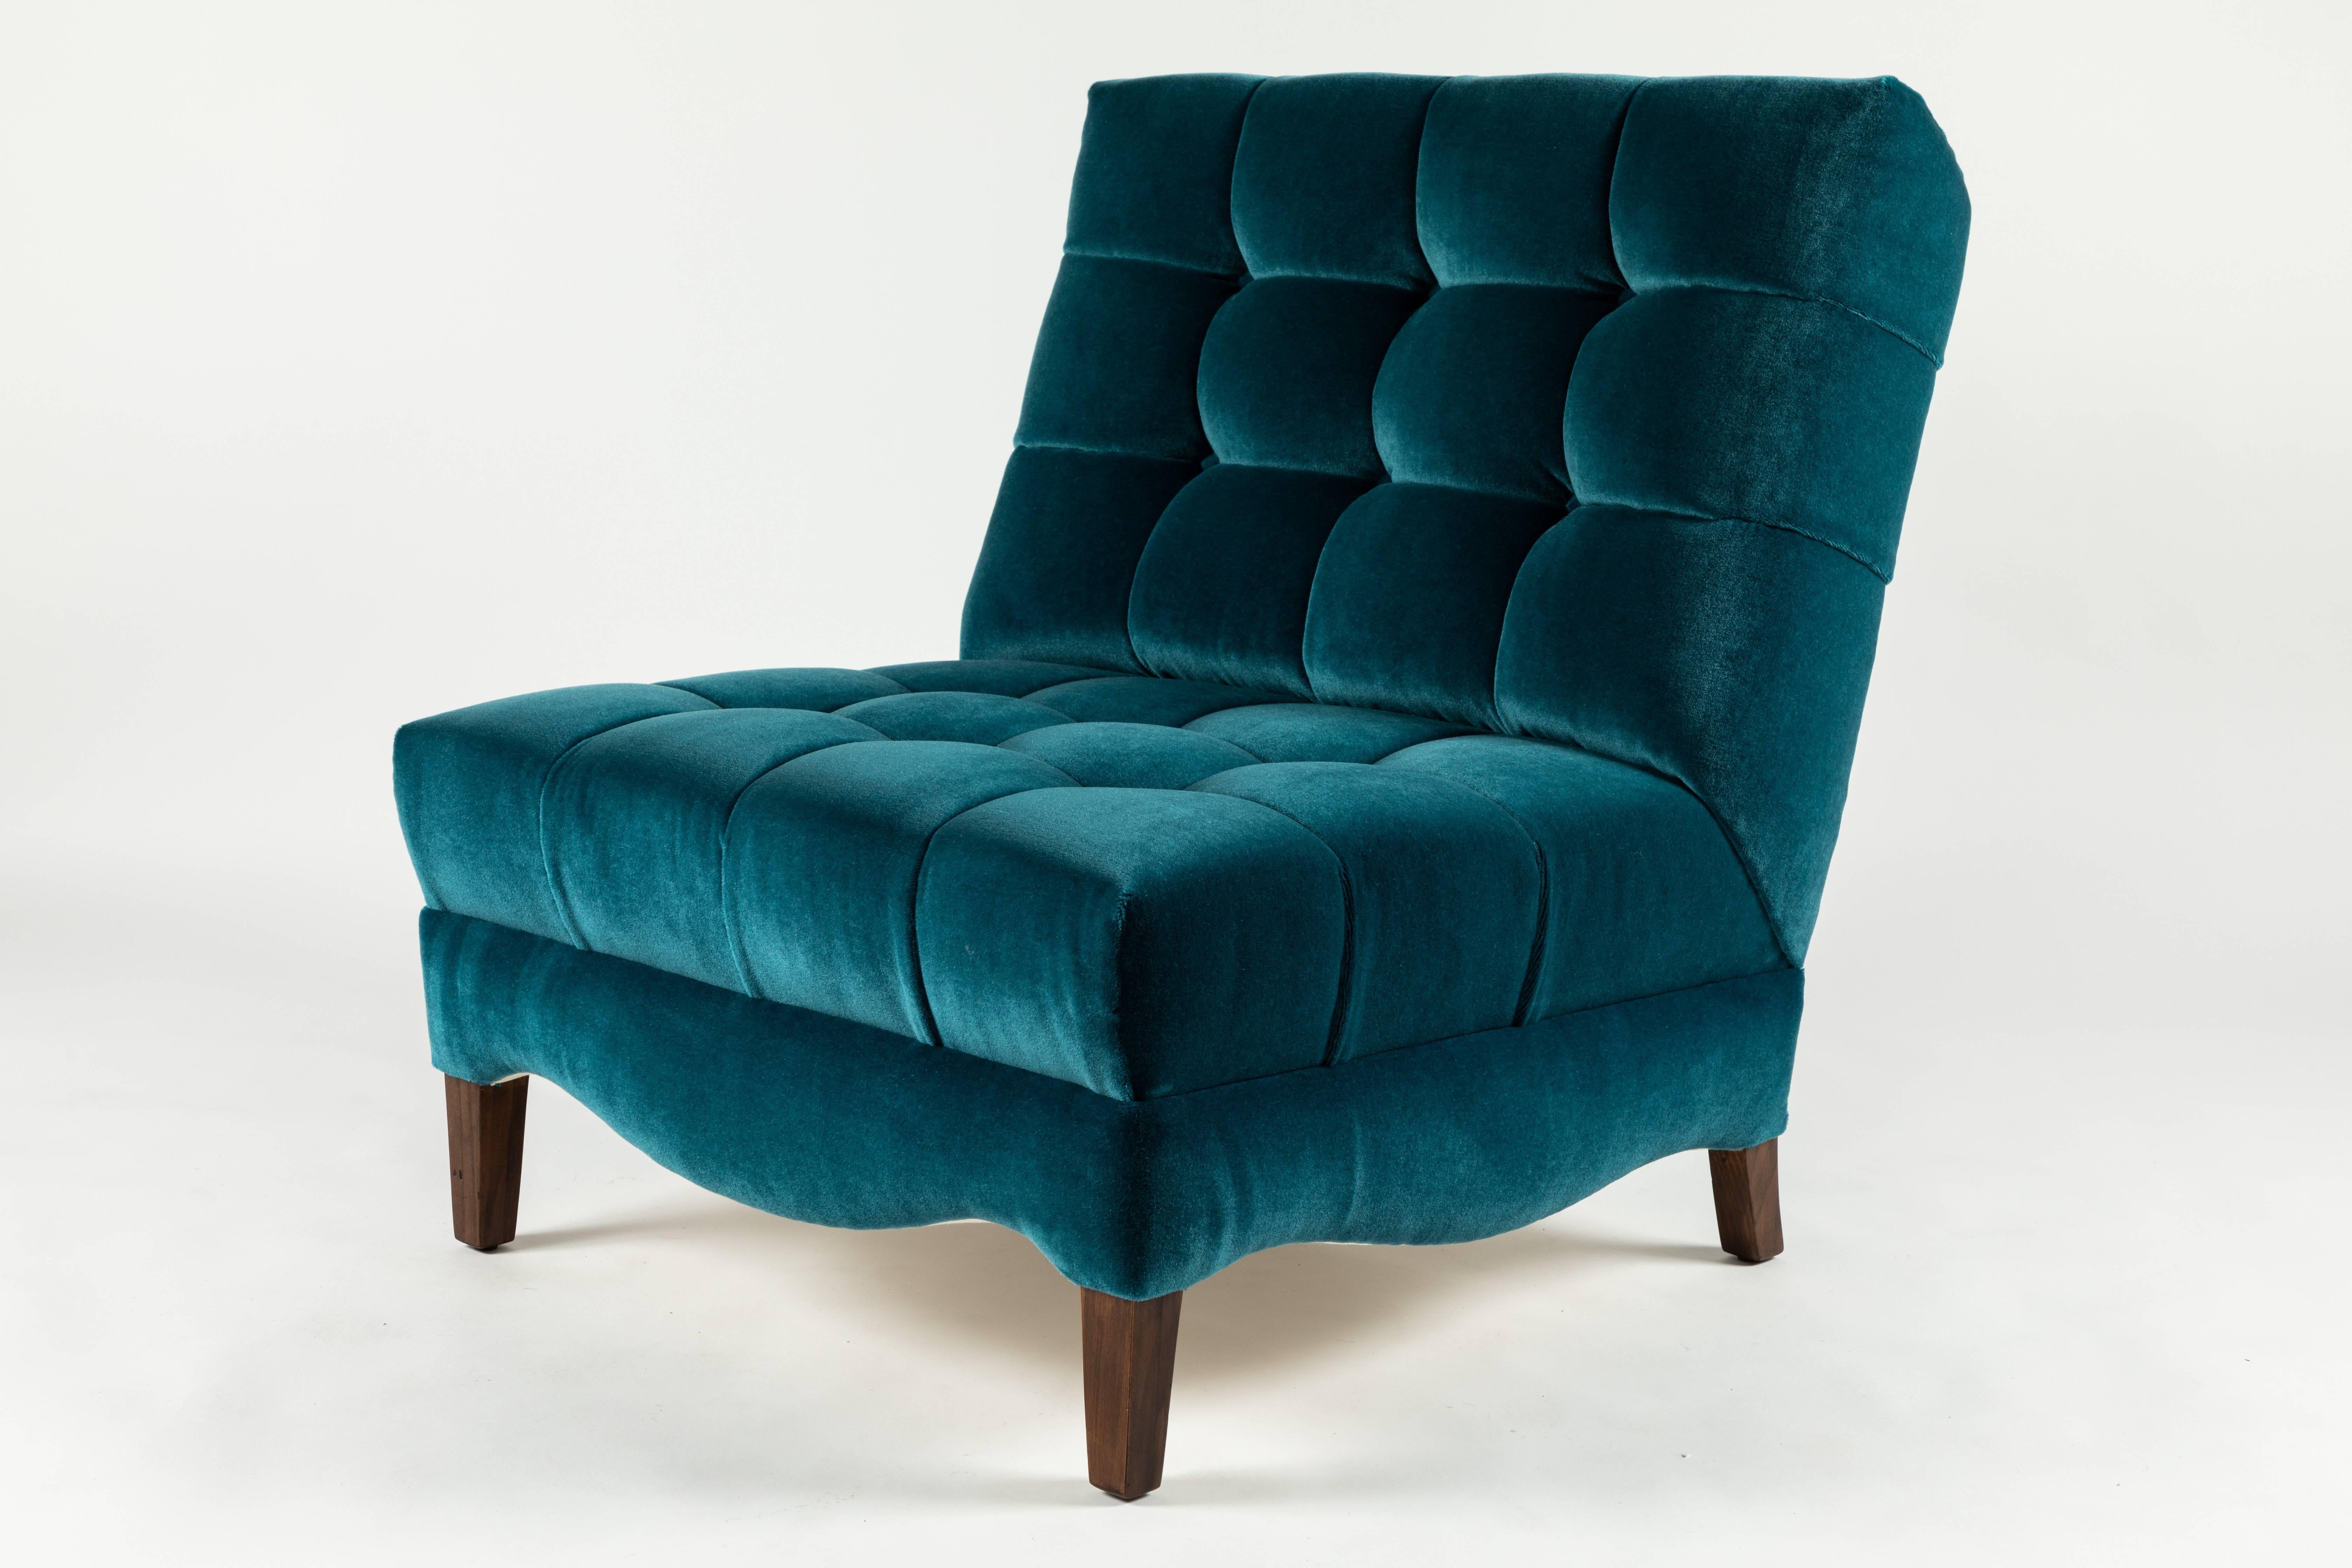 Polished Pair of Biscuit-Tufted Slipper Chairs Covered in Teal Mohair